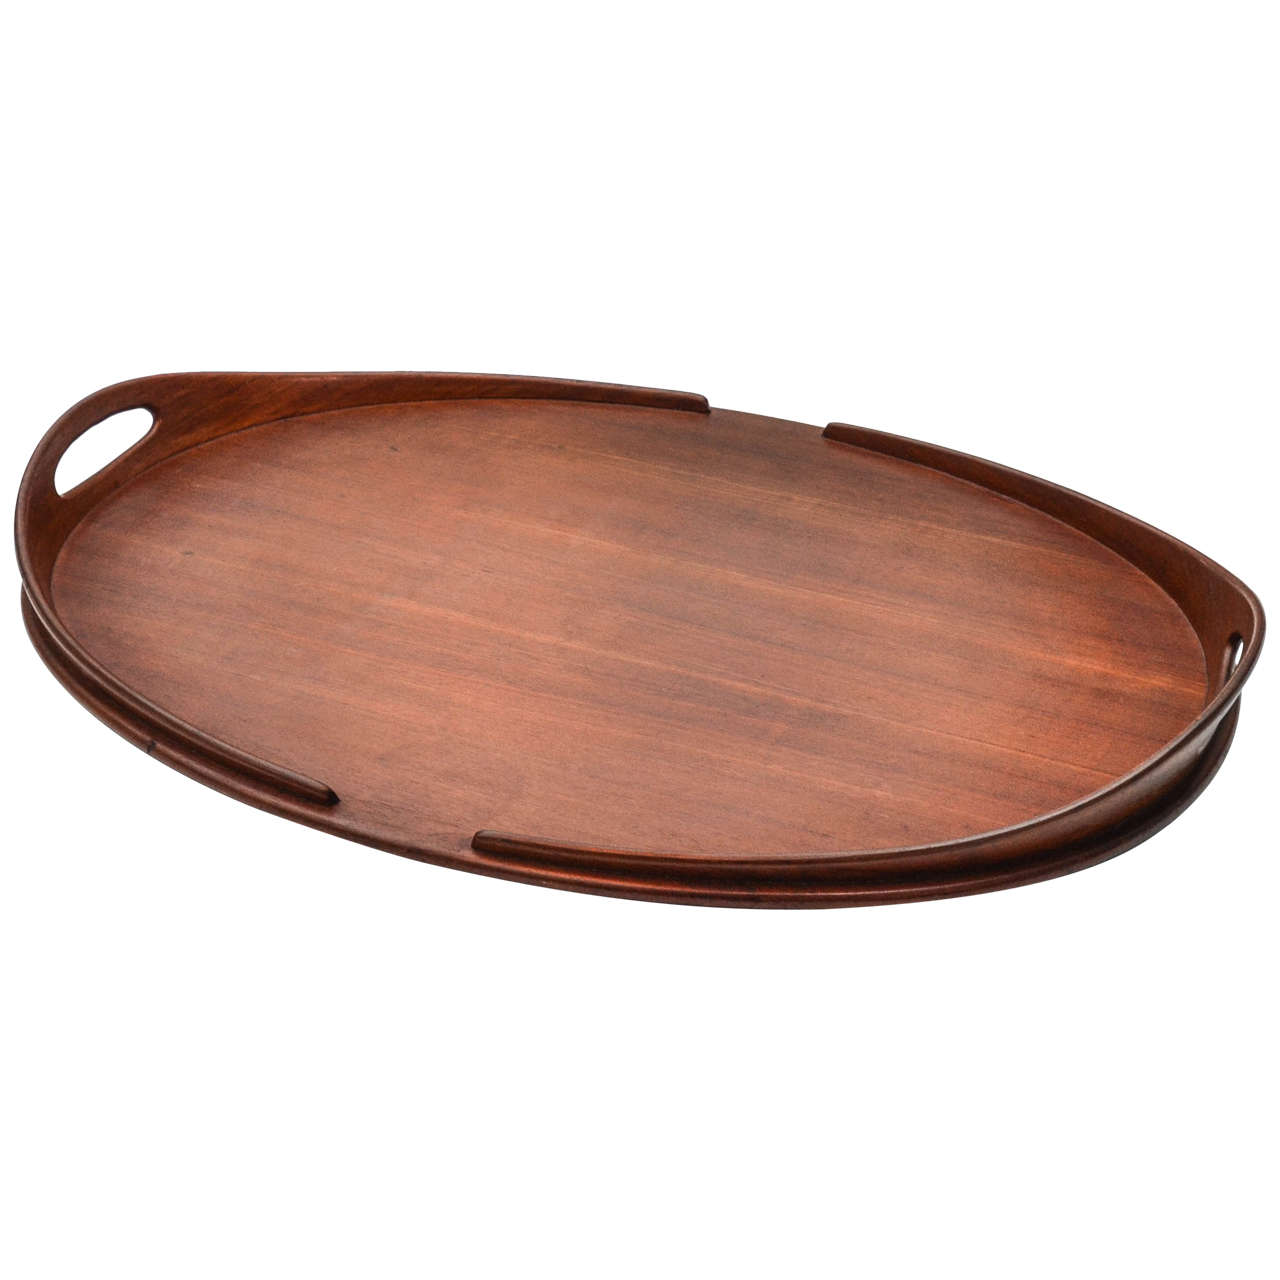 Teak Oval Gallery Tray by Jens Quistgaard, circa 1960 For Sale